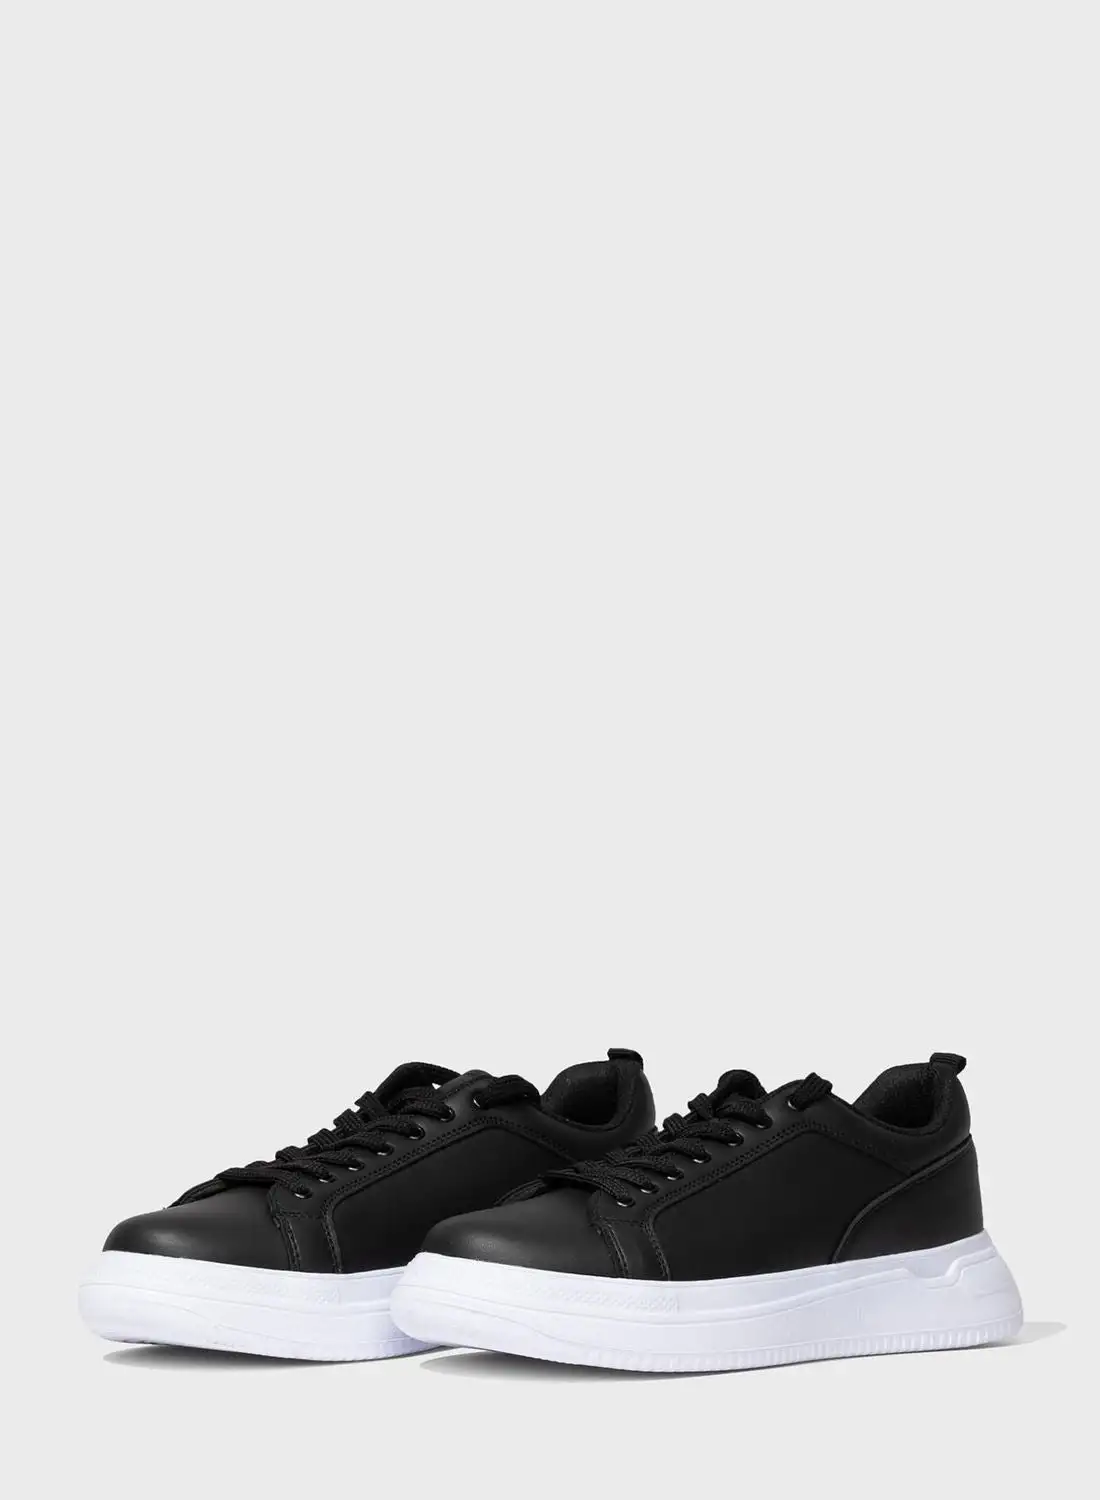 DeFacto Lace Up Low Top Sneakers